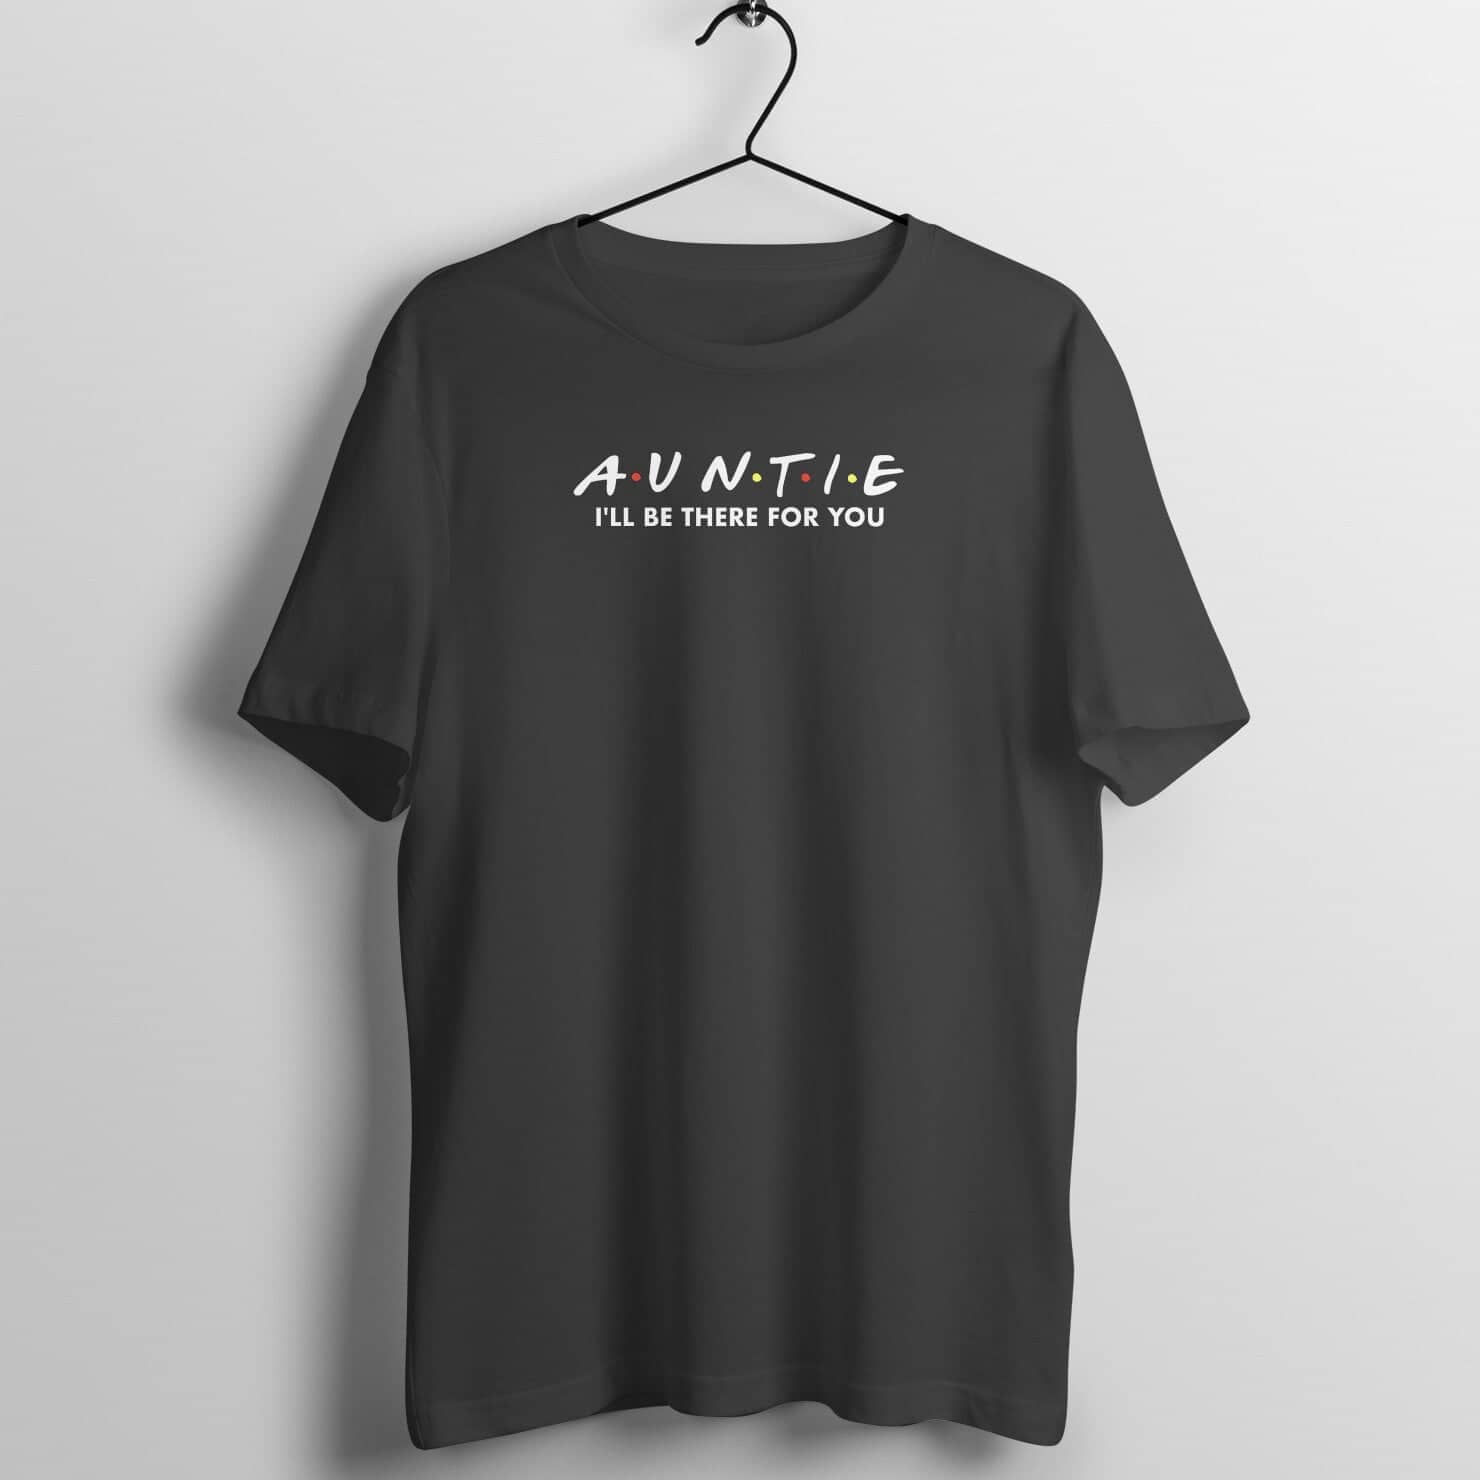 Auntie I'll Be There for You Special Black T Shirt for Women freeshipping - Catch My Drift India